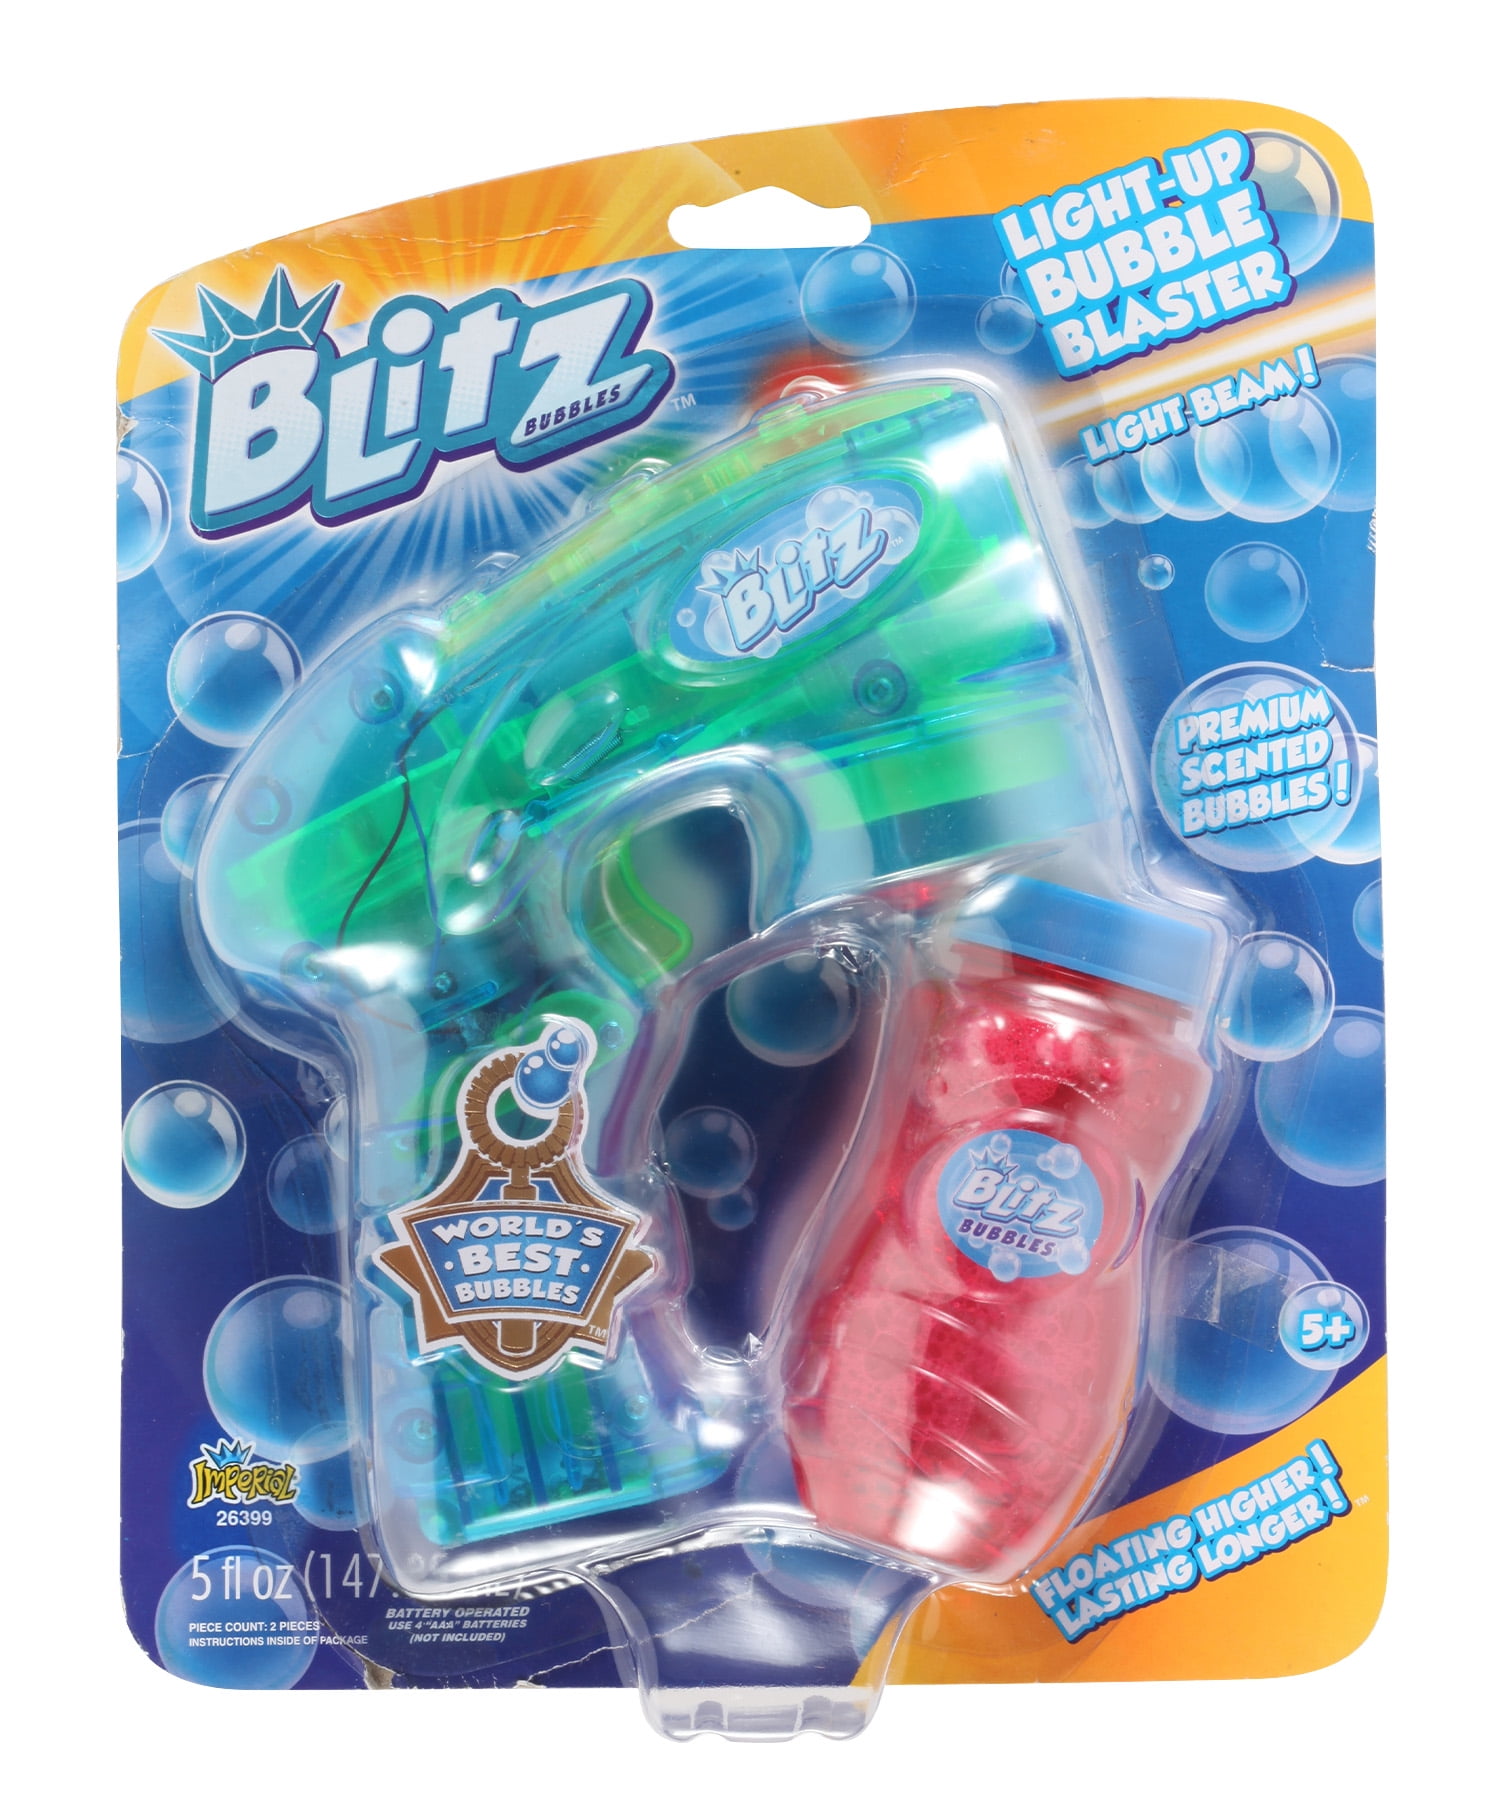 Details about   Marvel Avengers Bubble Blaster with 2 FL OZ Bubbles Factory Sealed New Item 